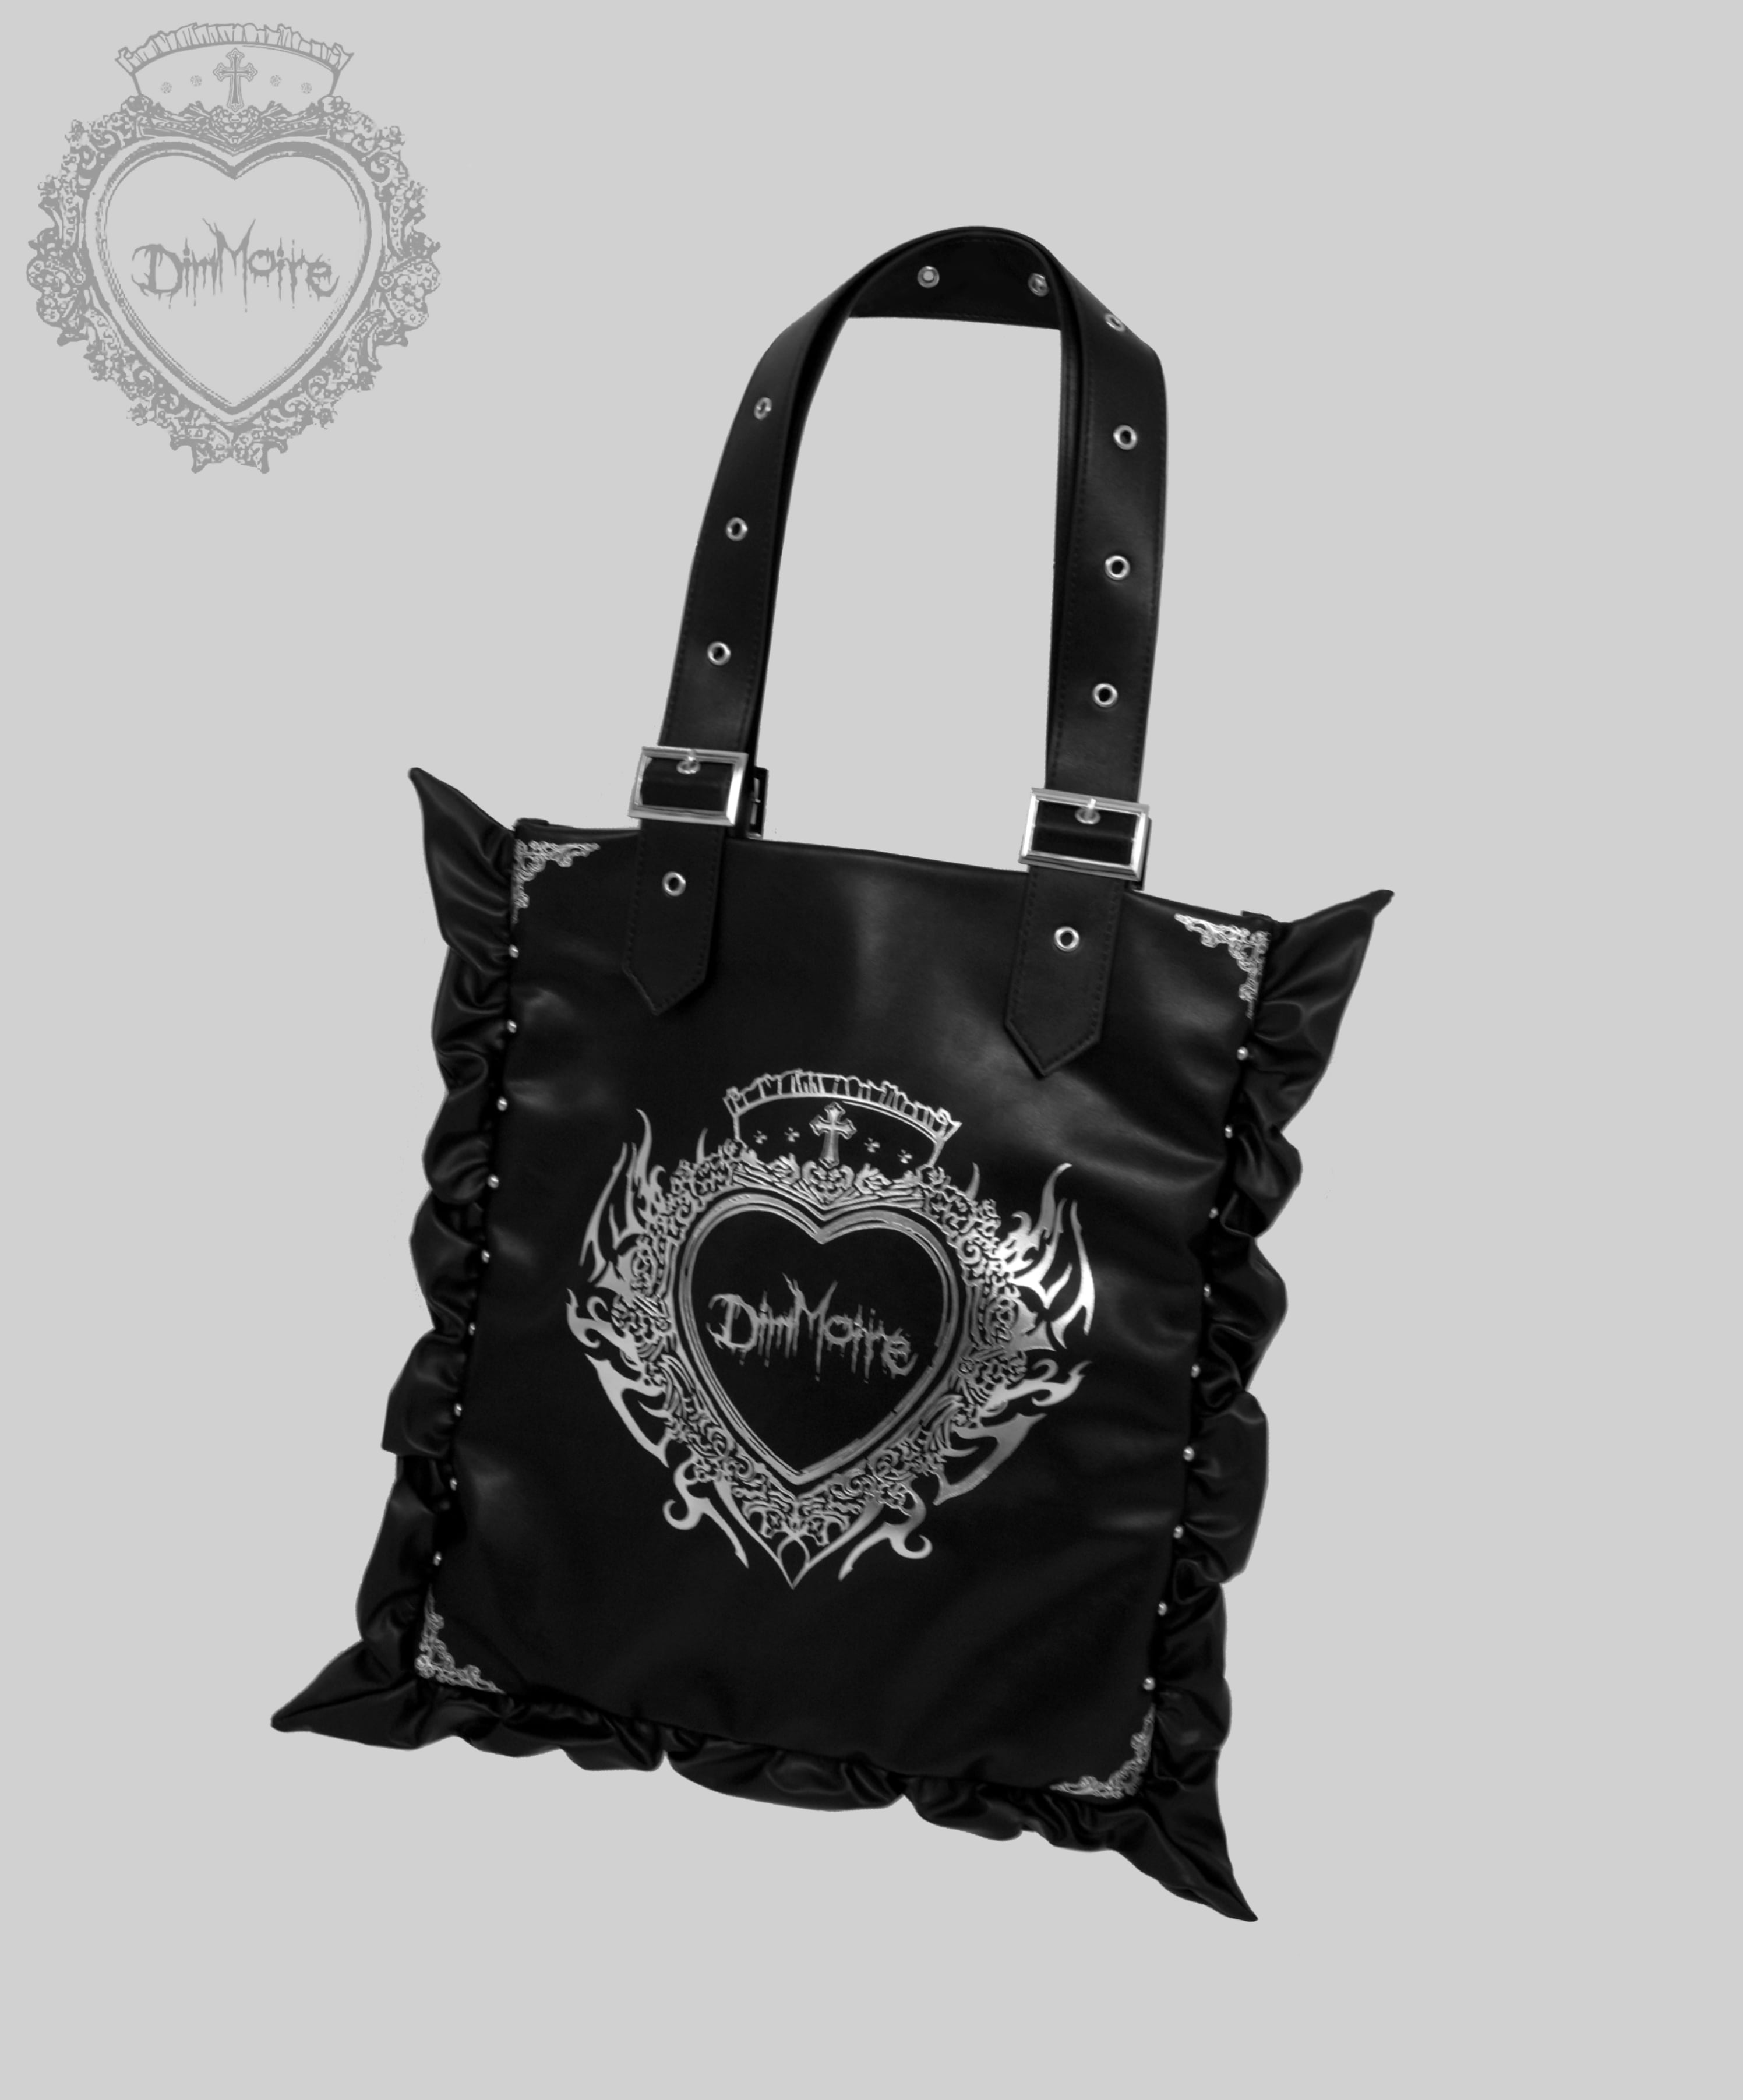 [DimMoire] Heart Core Frill tote bag